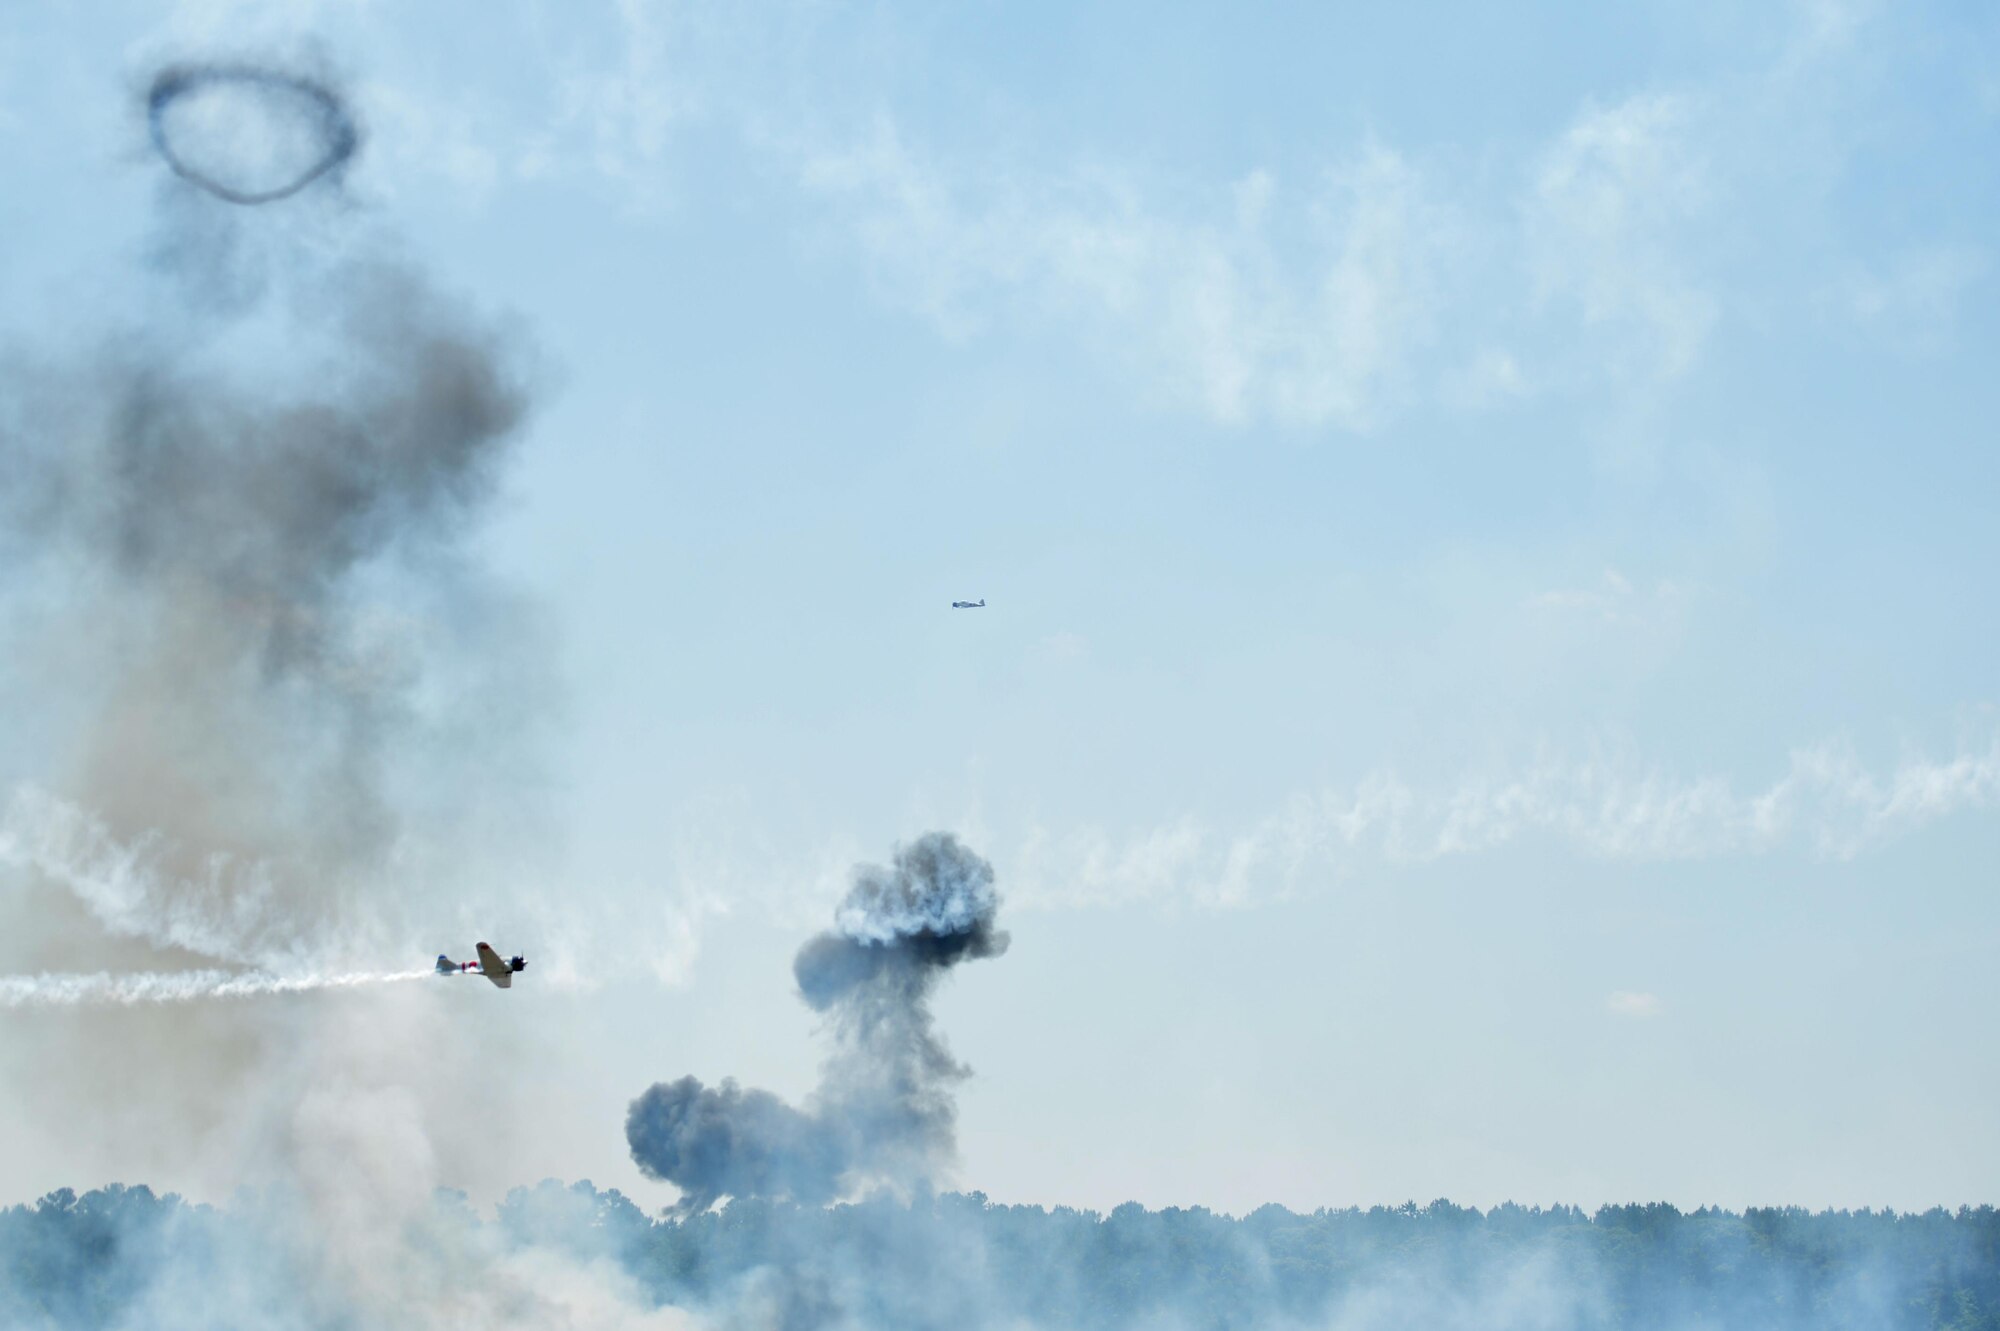 World War II-era Japanese and American aircraft fly as part of the "Tora! Tora! Tora!" performance during Wings Over Wayne Air Show, May 20, 2017, at Seymour Johnson Air Force Base, North Carolina. The performance is a re-creation of the Japanese attack on Pearl Harbor and is intended to memorialize all the service members who lost their lives on that day. (U.S. Air Force photo by Airman 1st Class Christopher Maldonado)